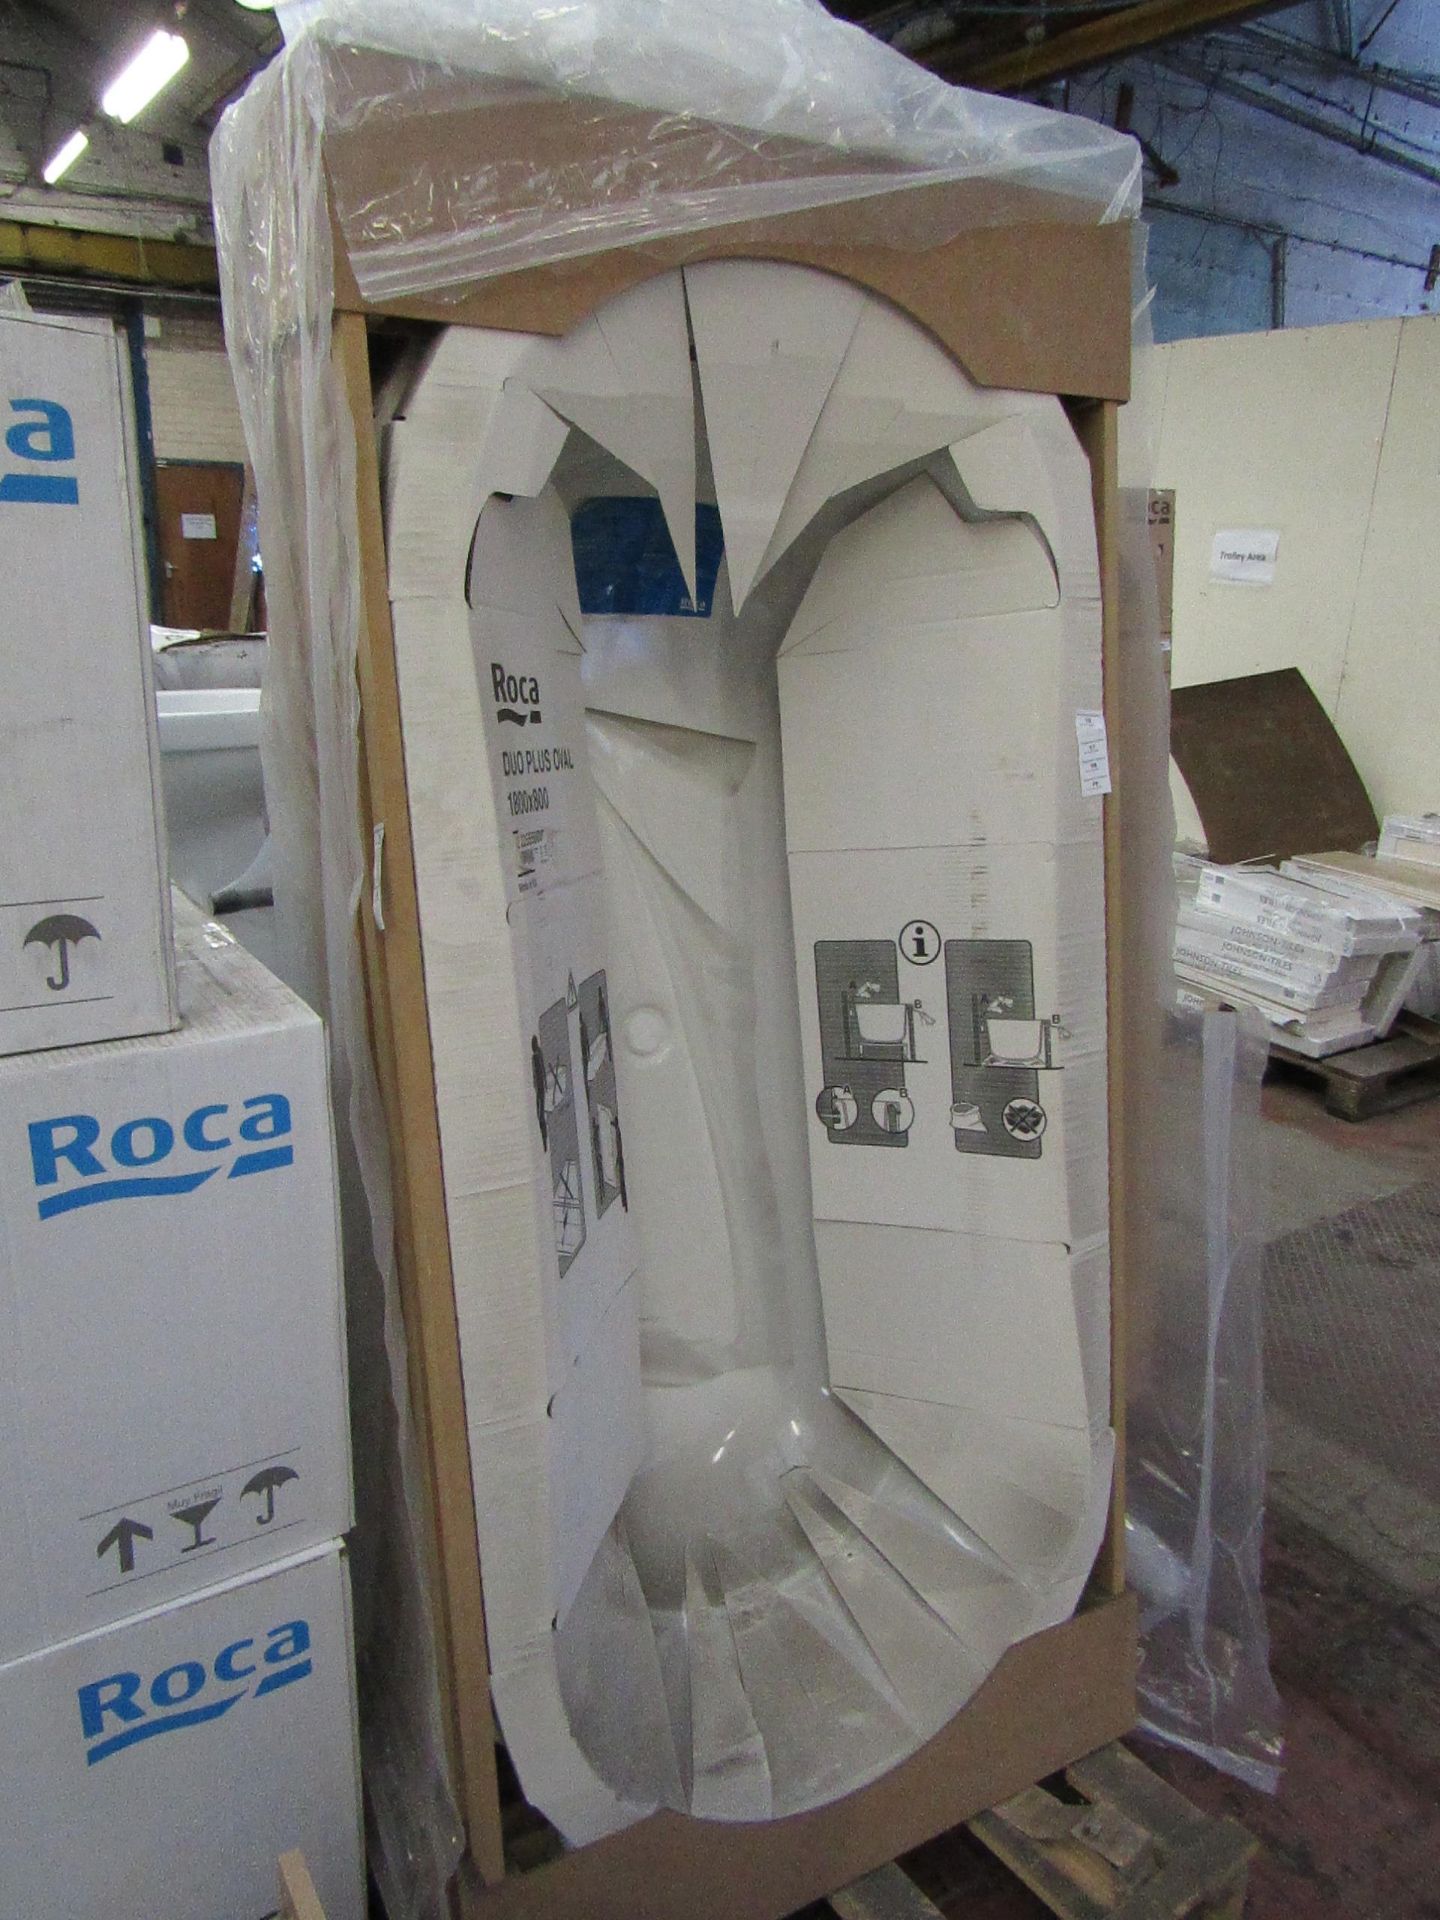 Roca Duo Plus Oval bath tub 1800 x 800, new and packaged. RRP £1700.00